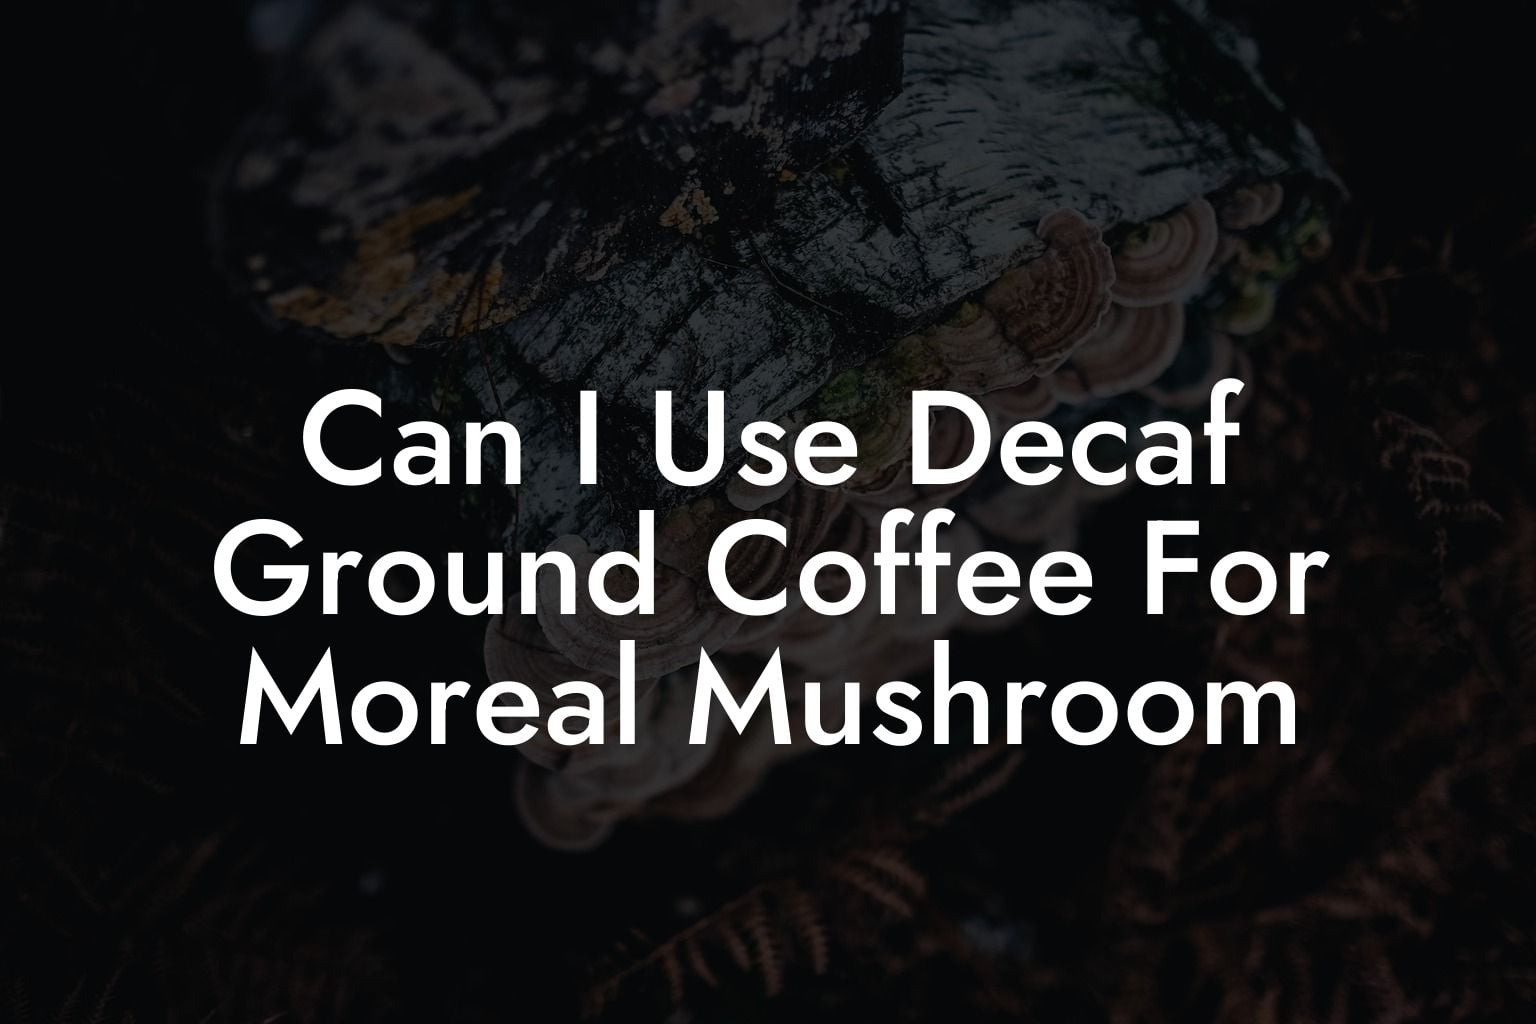 Can I Use Decaf Ground Coffee For Moreal Mushroom